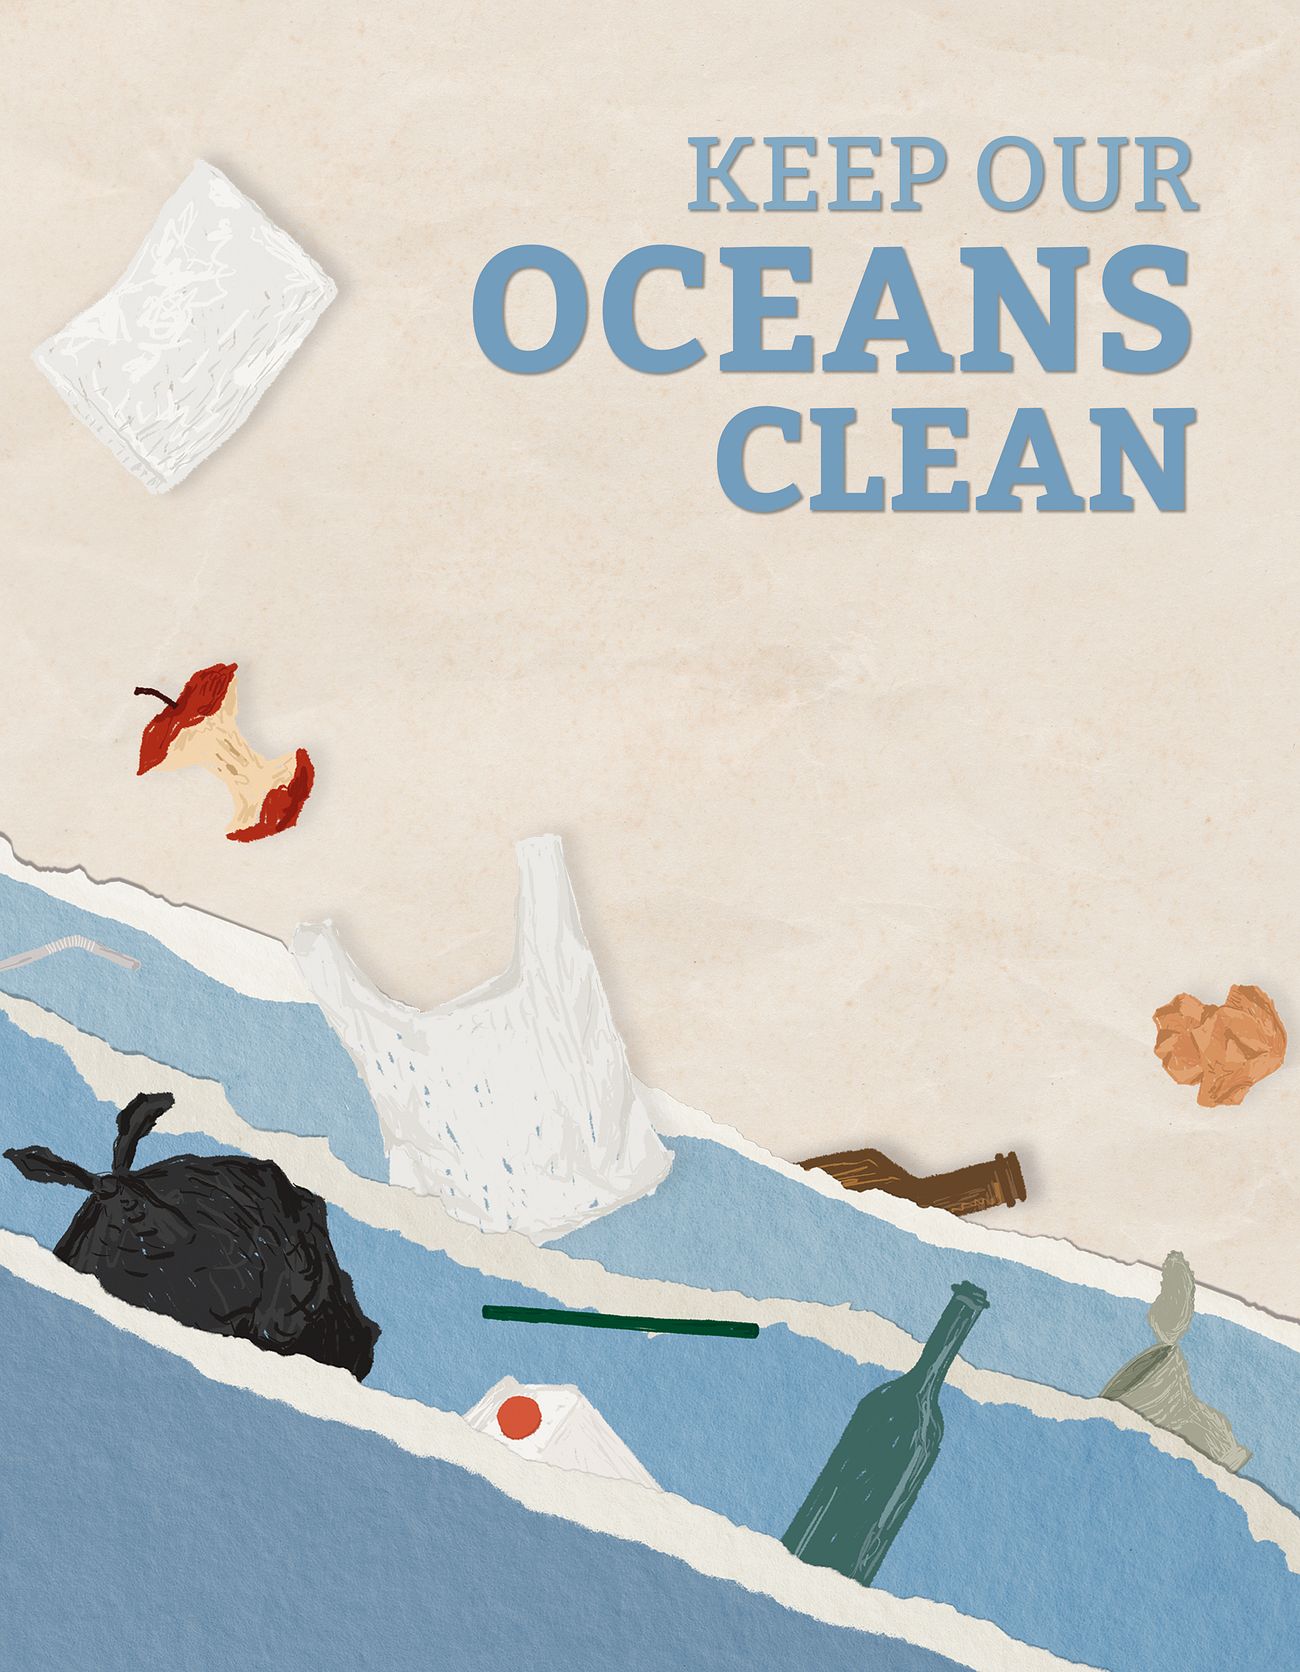 Ocean Safety Poster